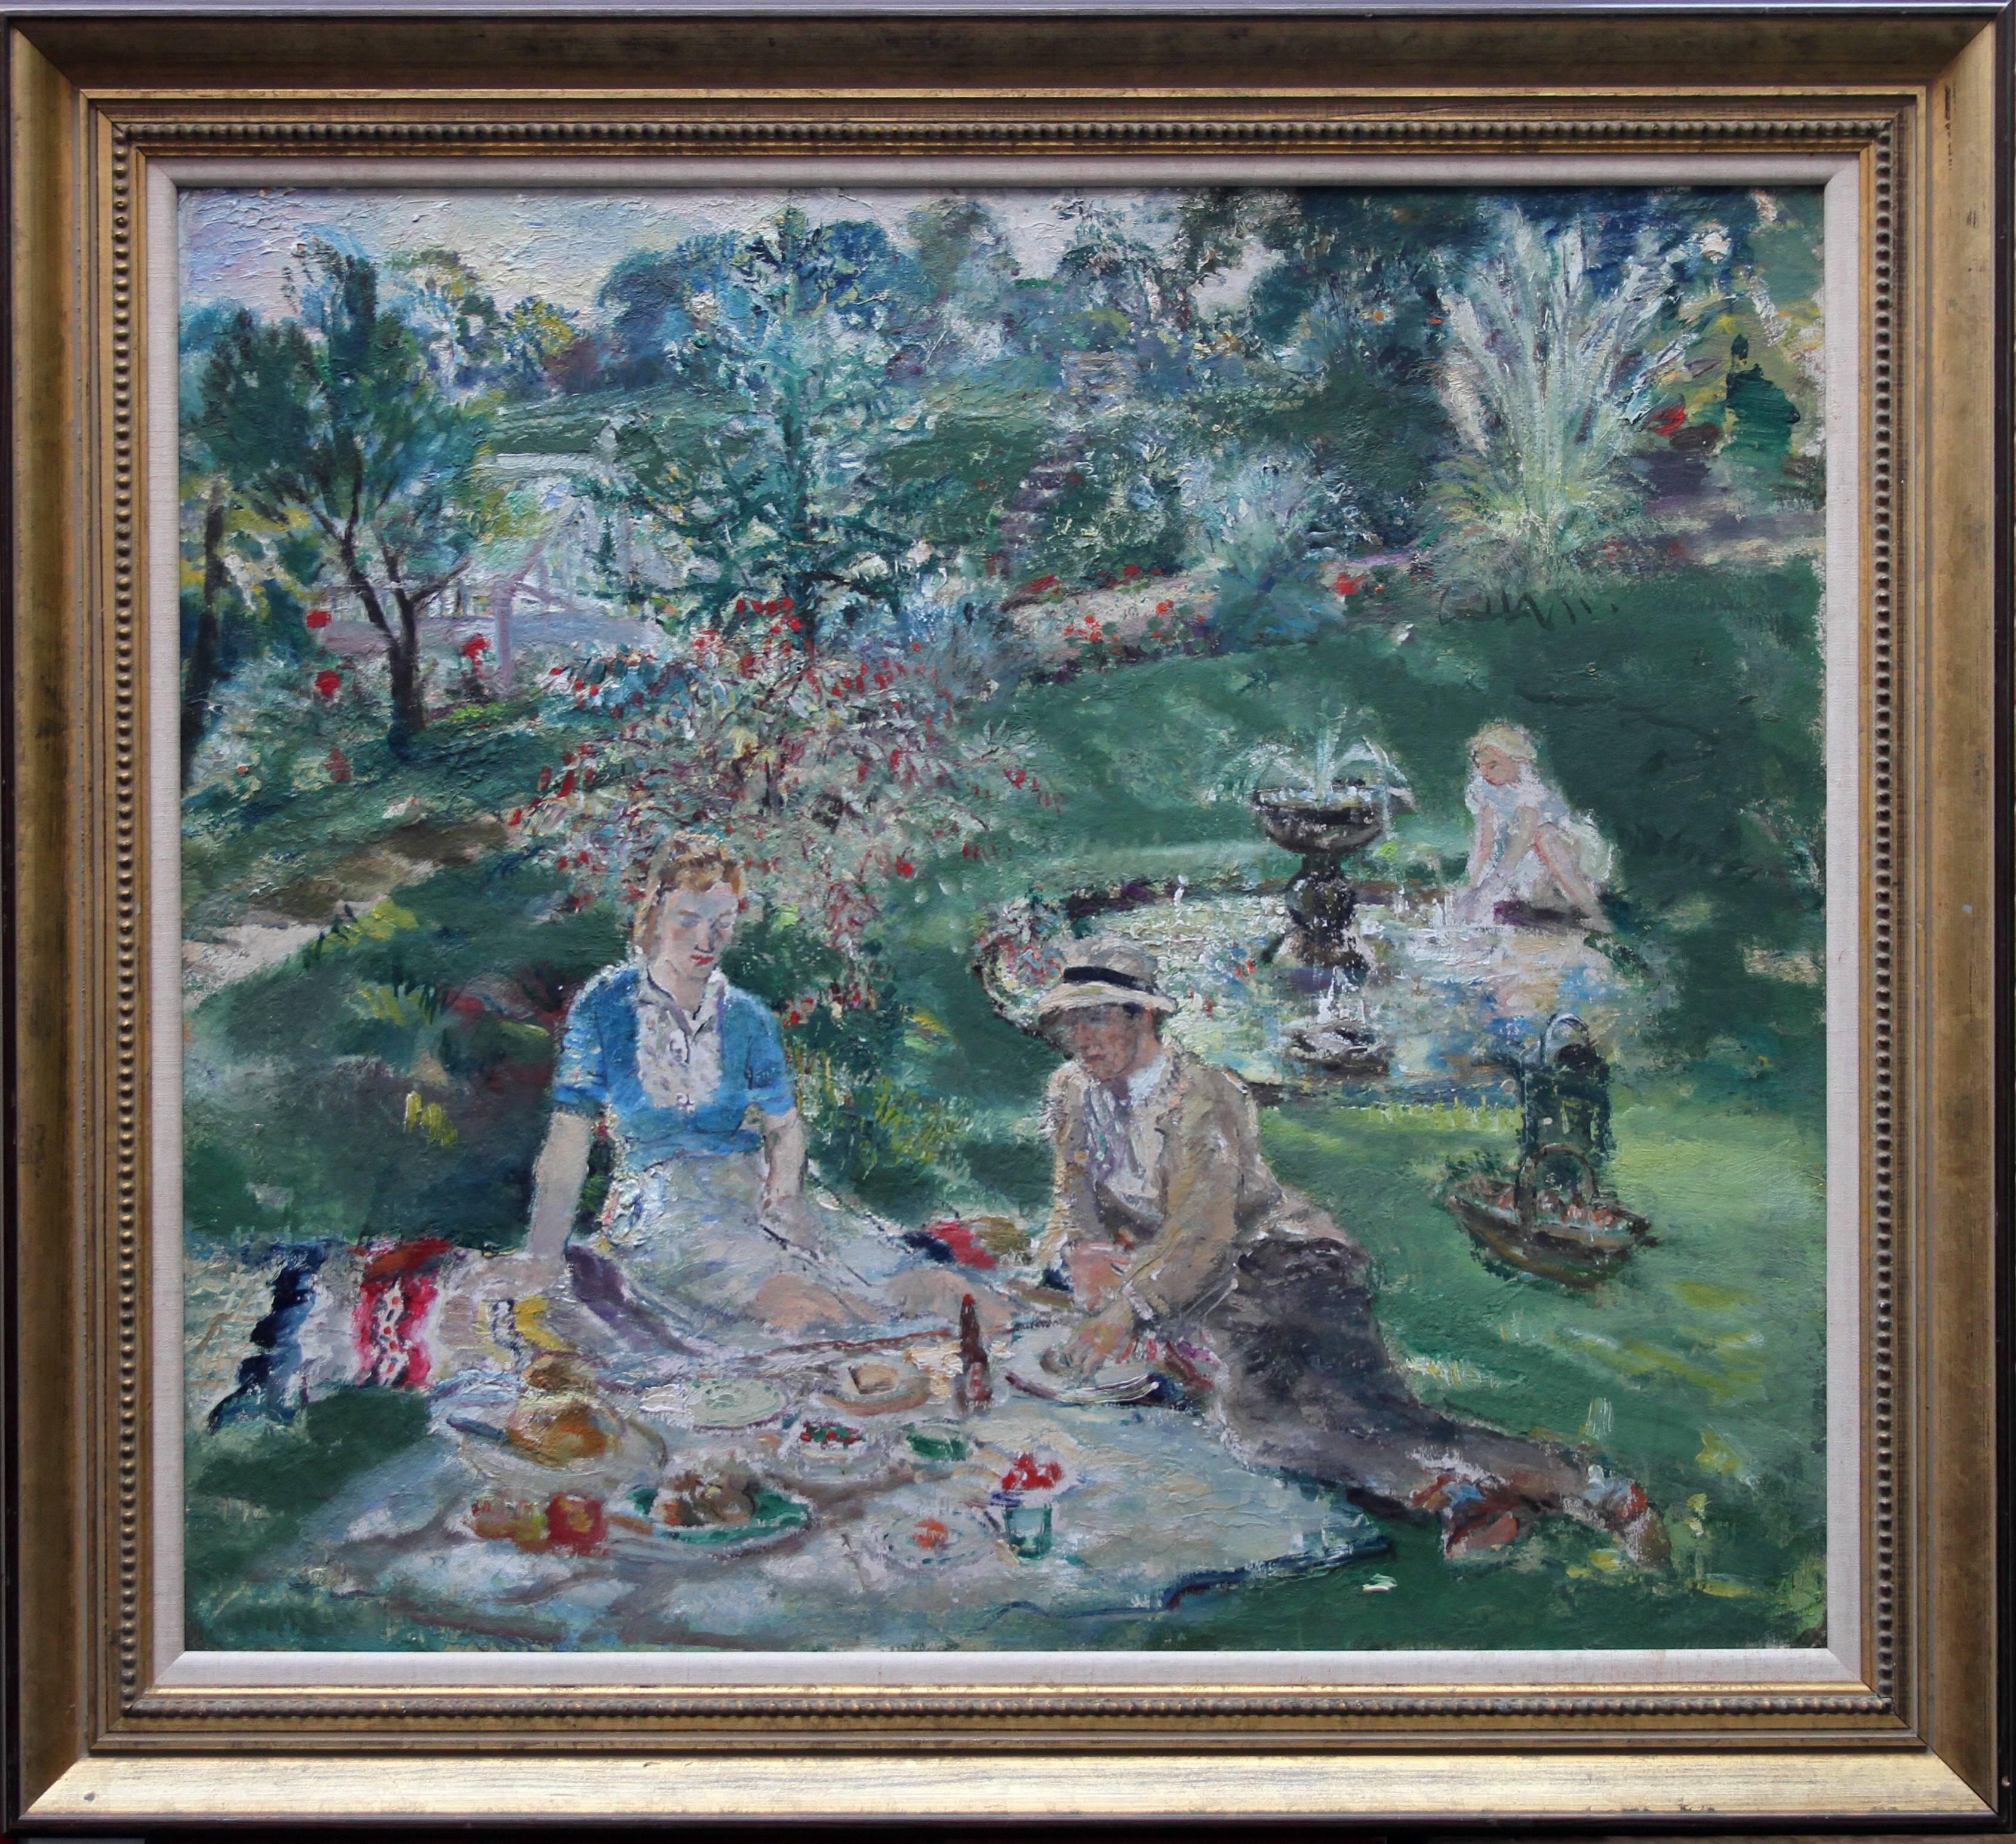 Garden Picnic - British 30's Post impressionist art oil painting Prout family 